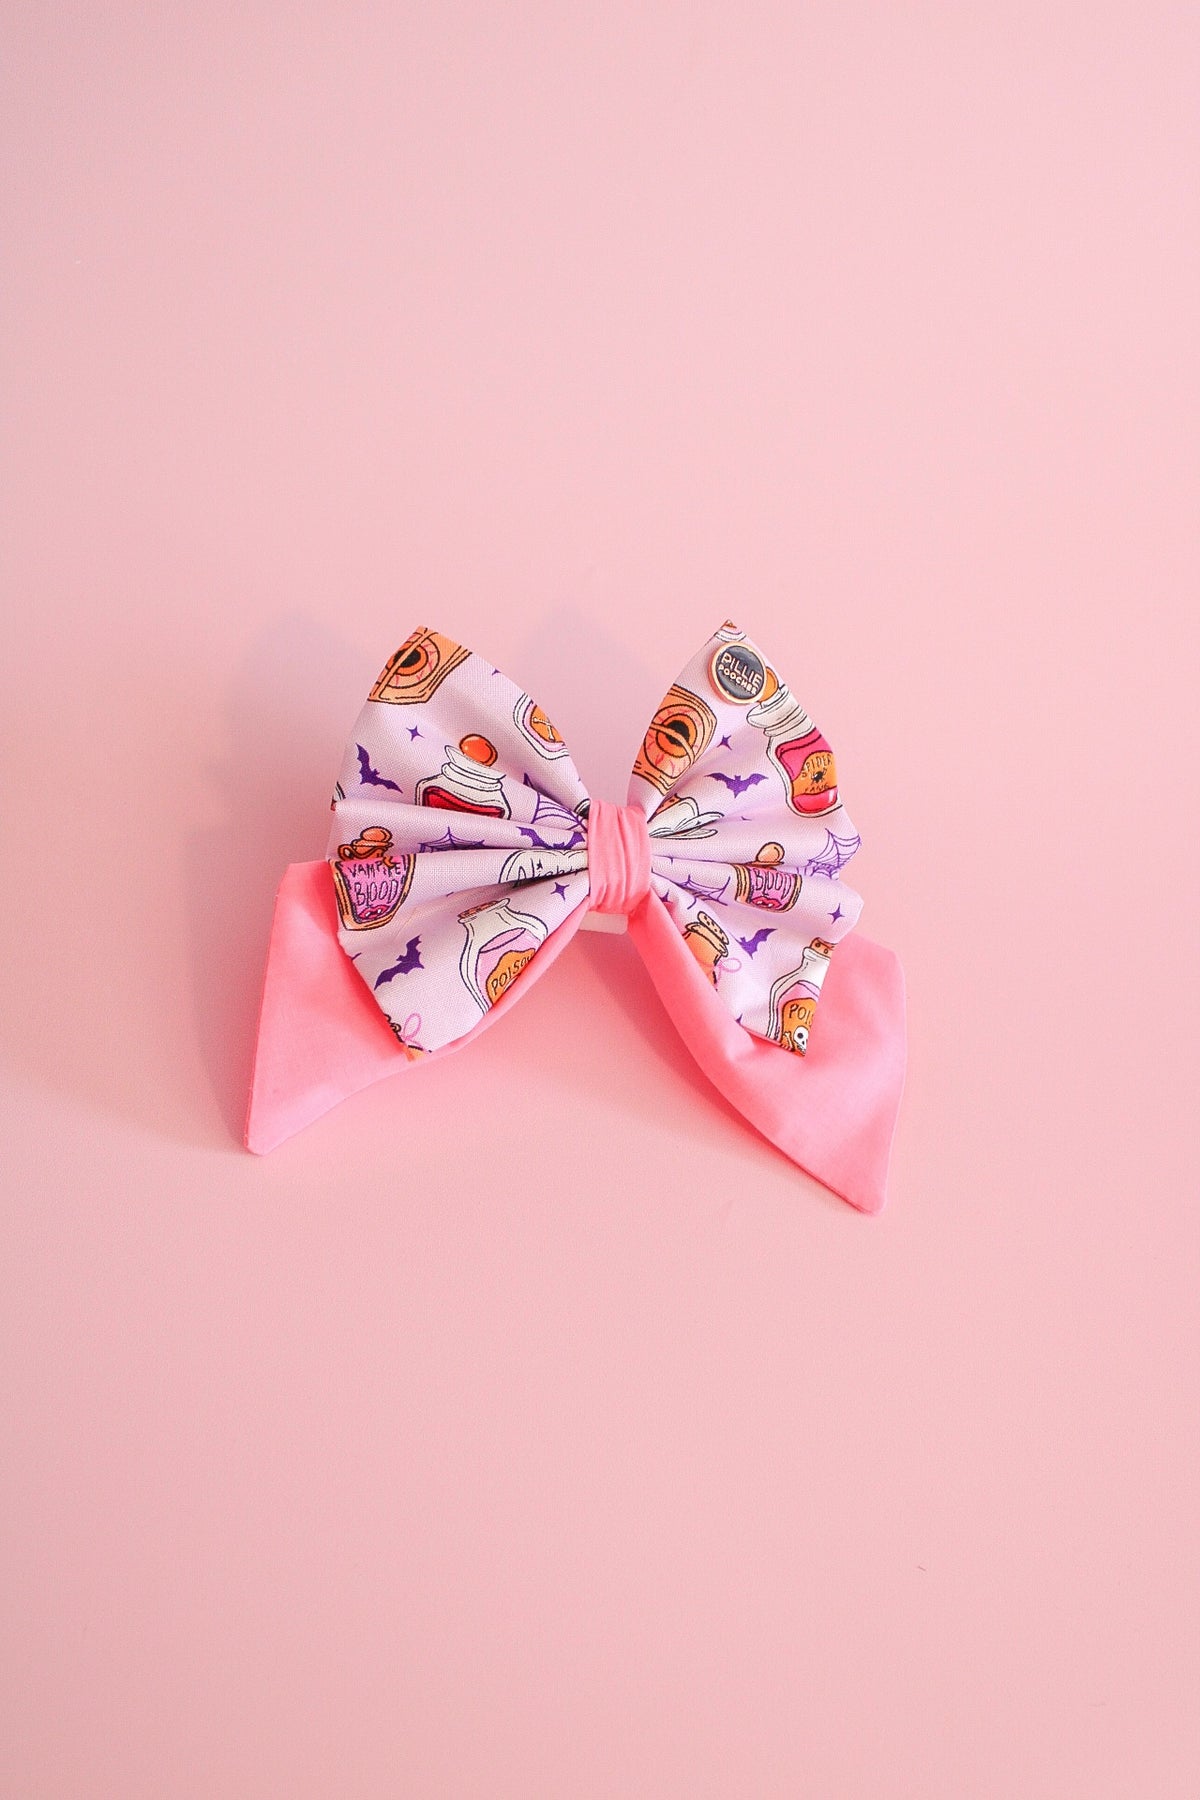 Magic Two-Tone w/light pink - Bows (Sailor or Standard)